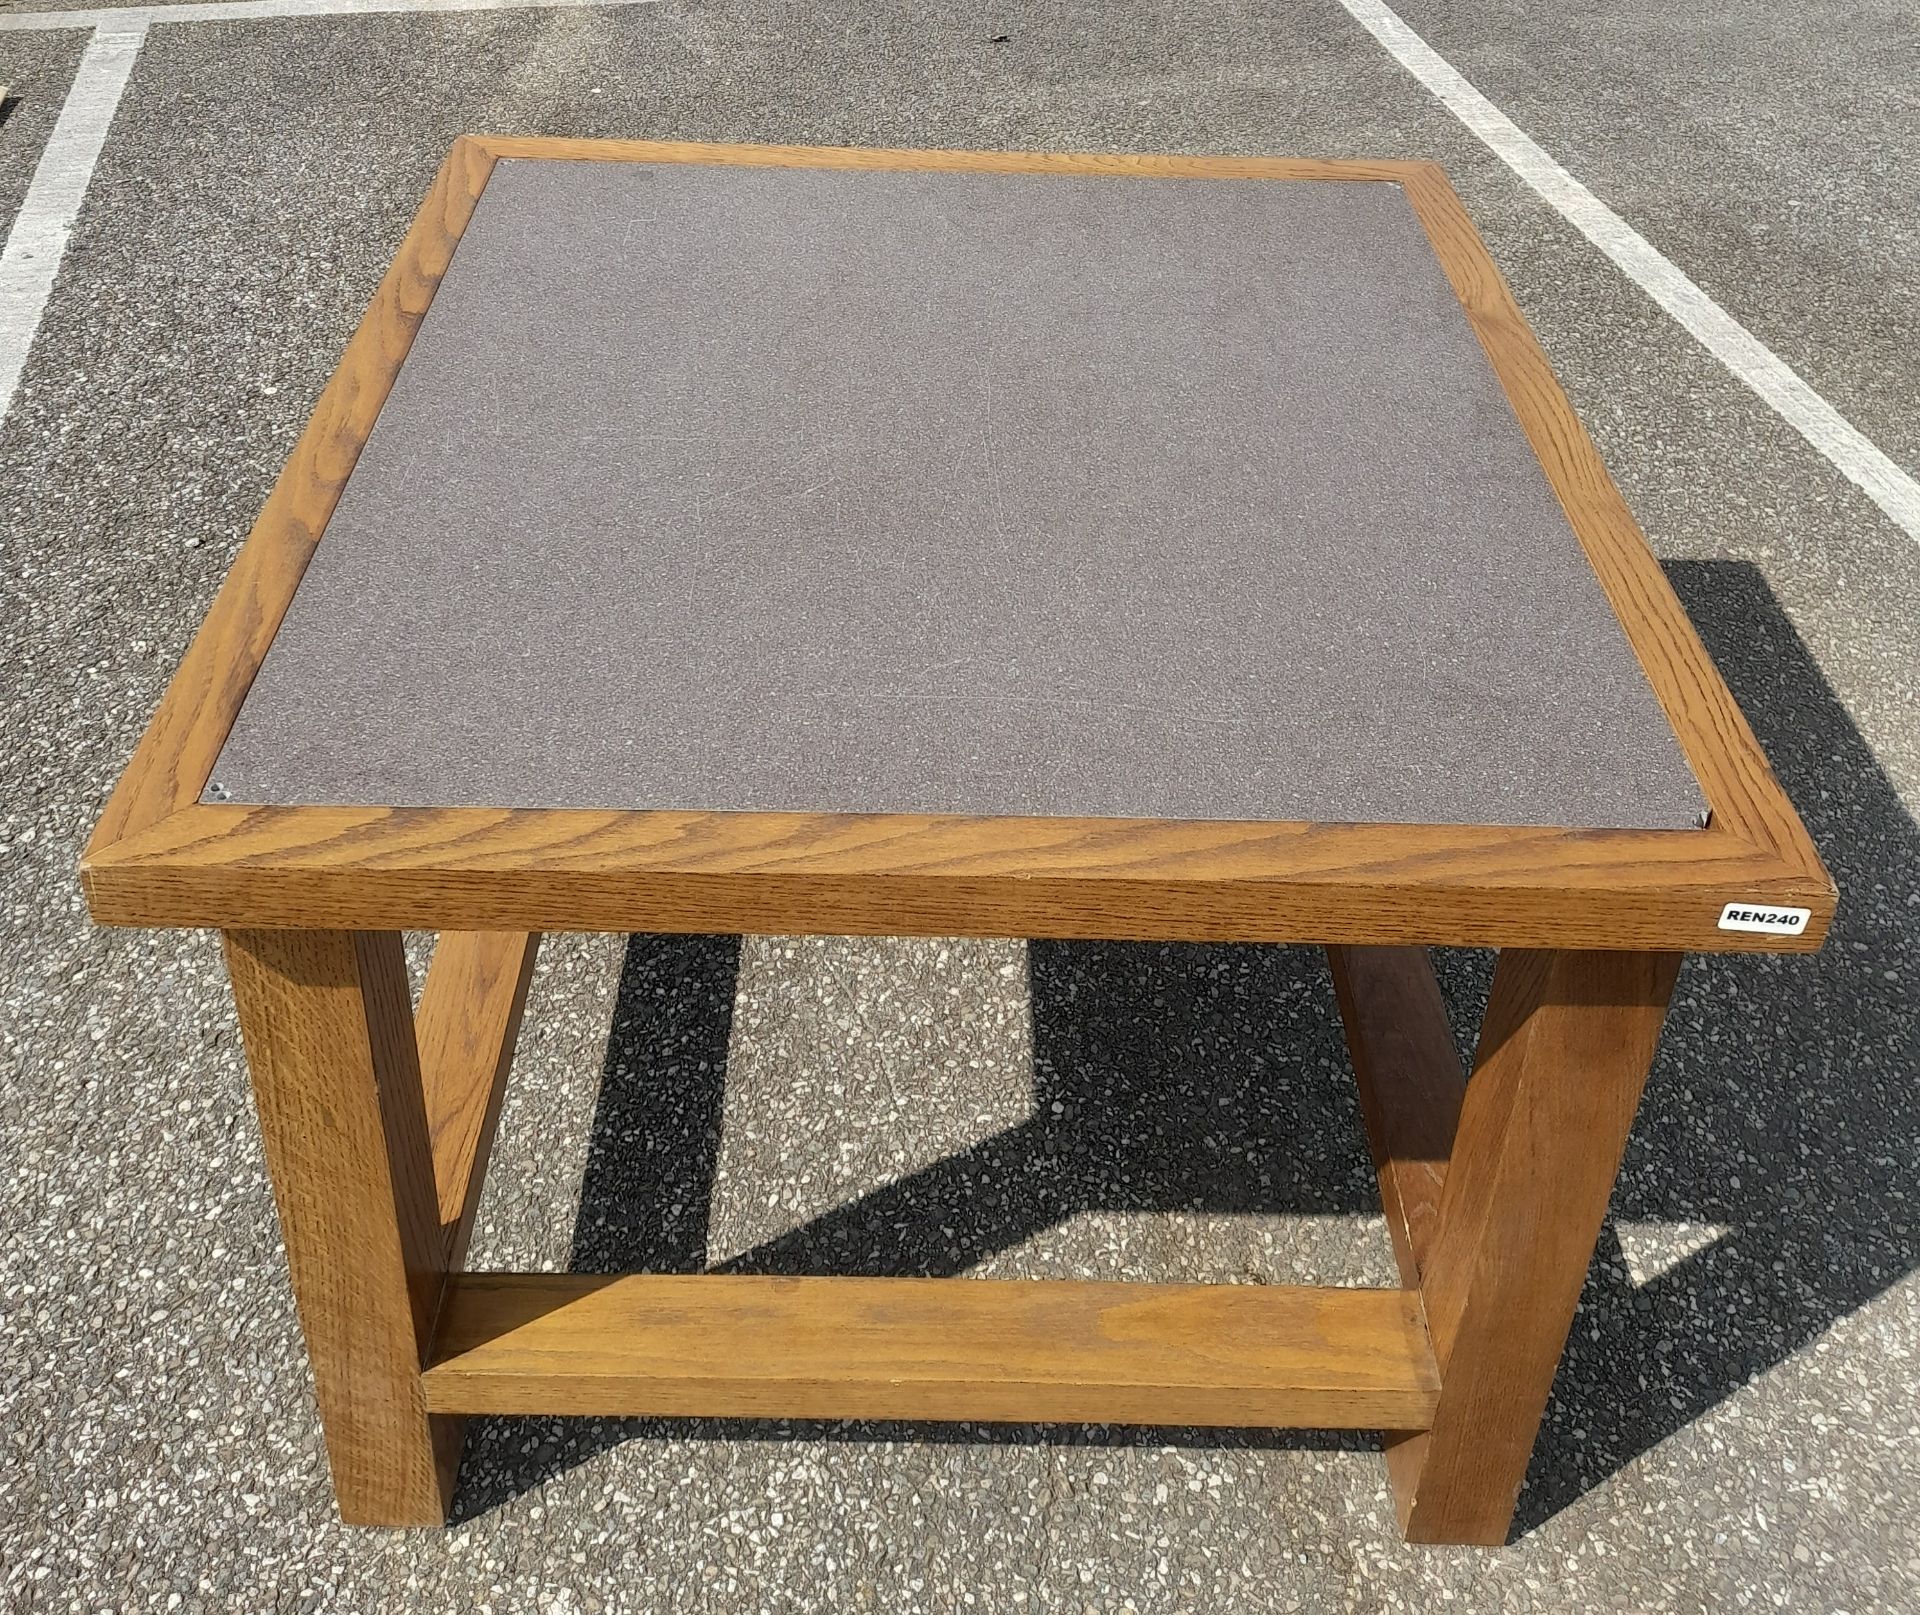 1 x Wooden Coffee Table with Granite-Effect Top - Ref: REN240 - CL999 - Location: Altrincham